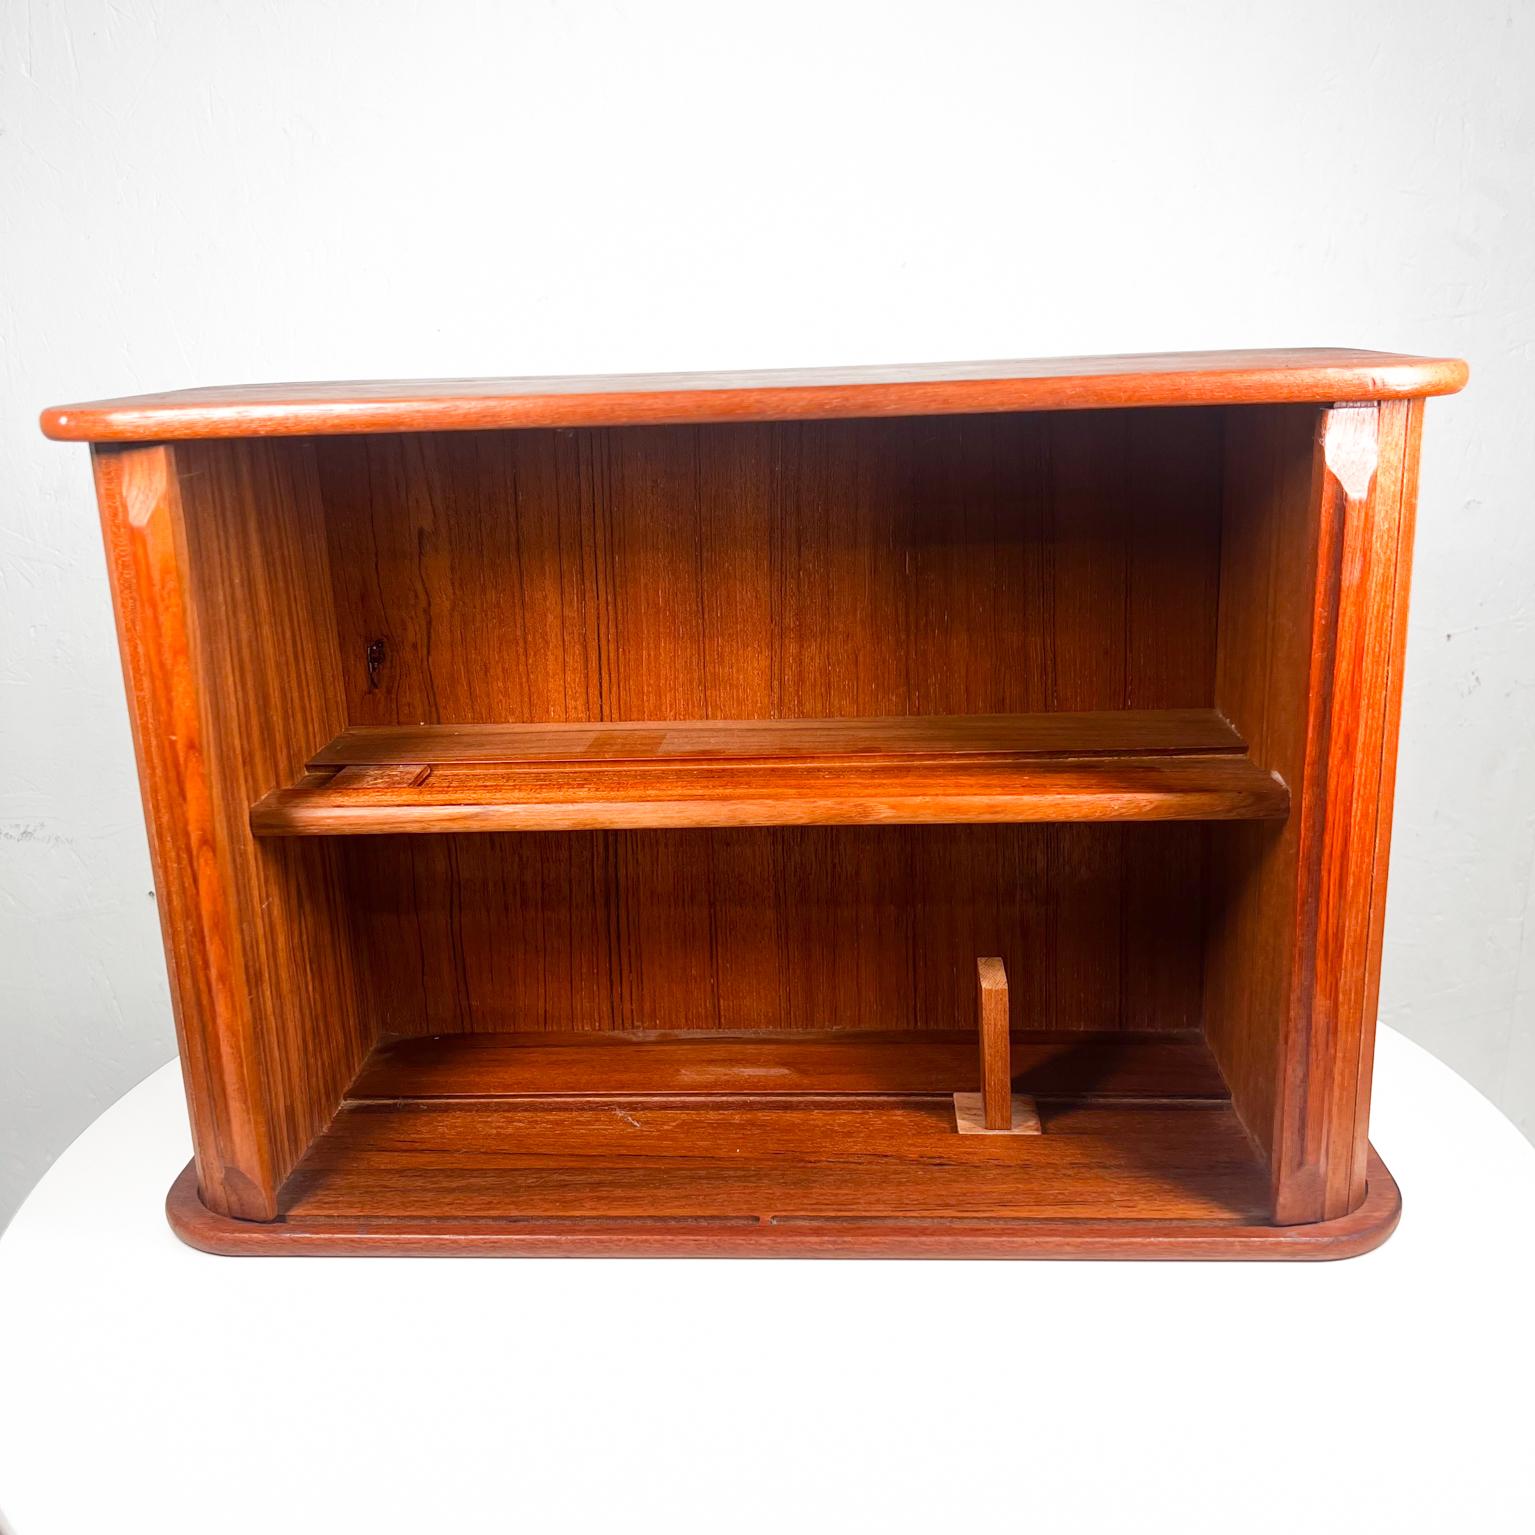 1960s Wall Storage Unit Cabinet Teak Wood Tambour Doors
Hanging Wall Unit cubby shelf storage or for tabletop
No hardware is included.
Unmarked
18.13 w x 7.75 d x 11.88
Preowned vintage unrestored condition
See all images provided.